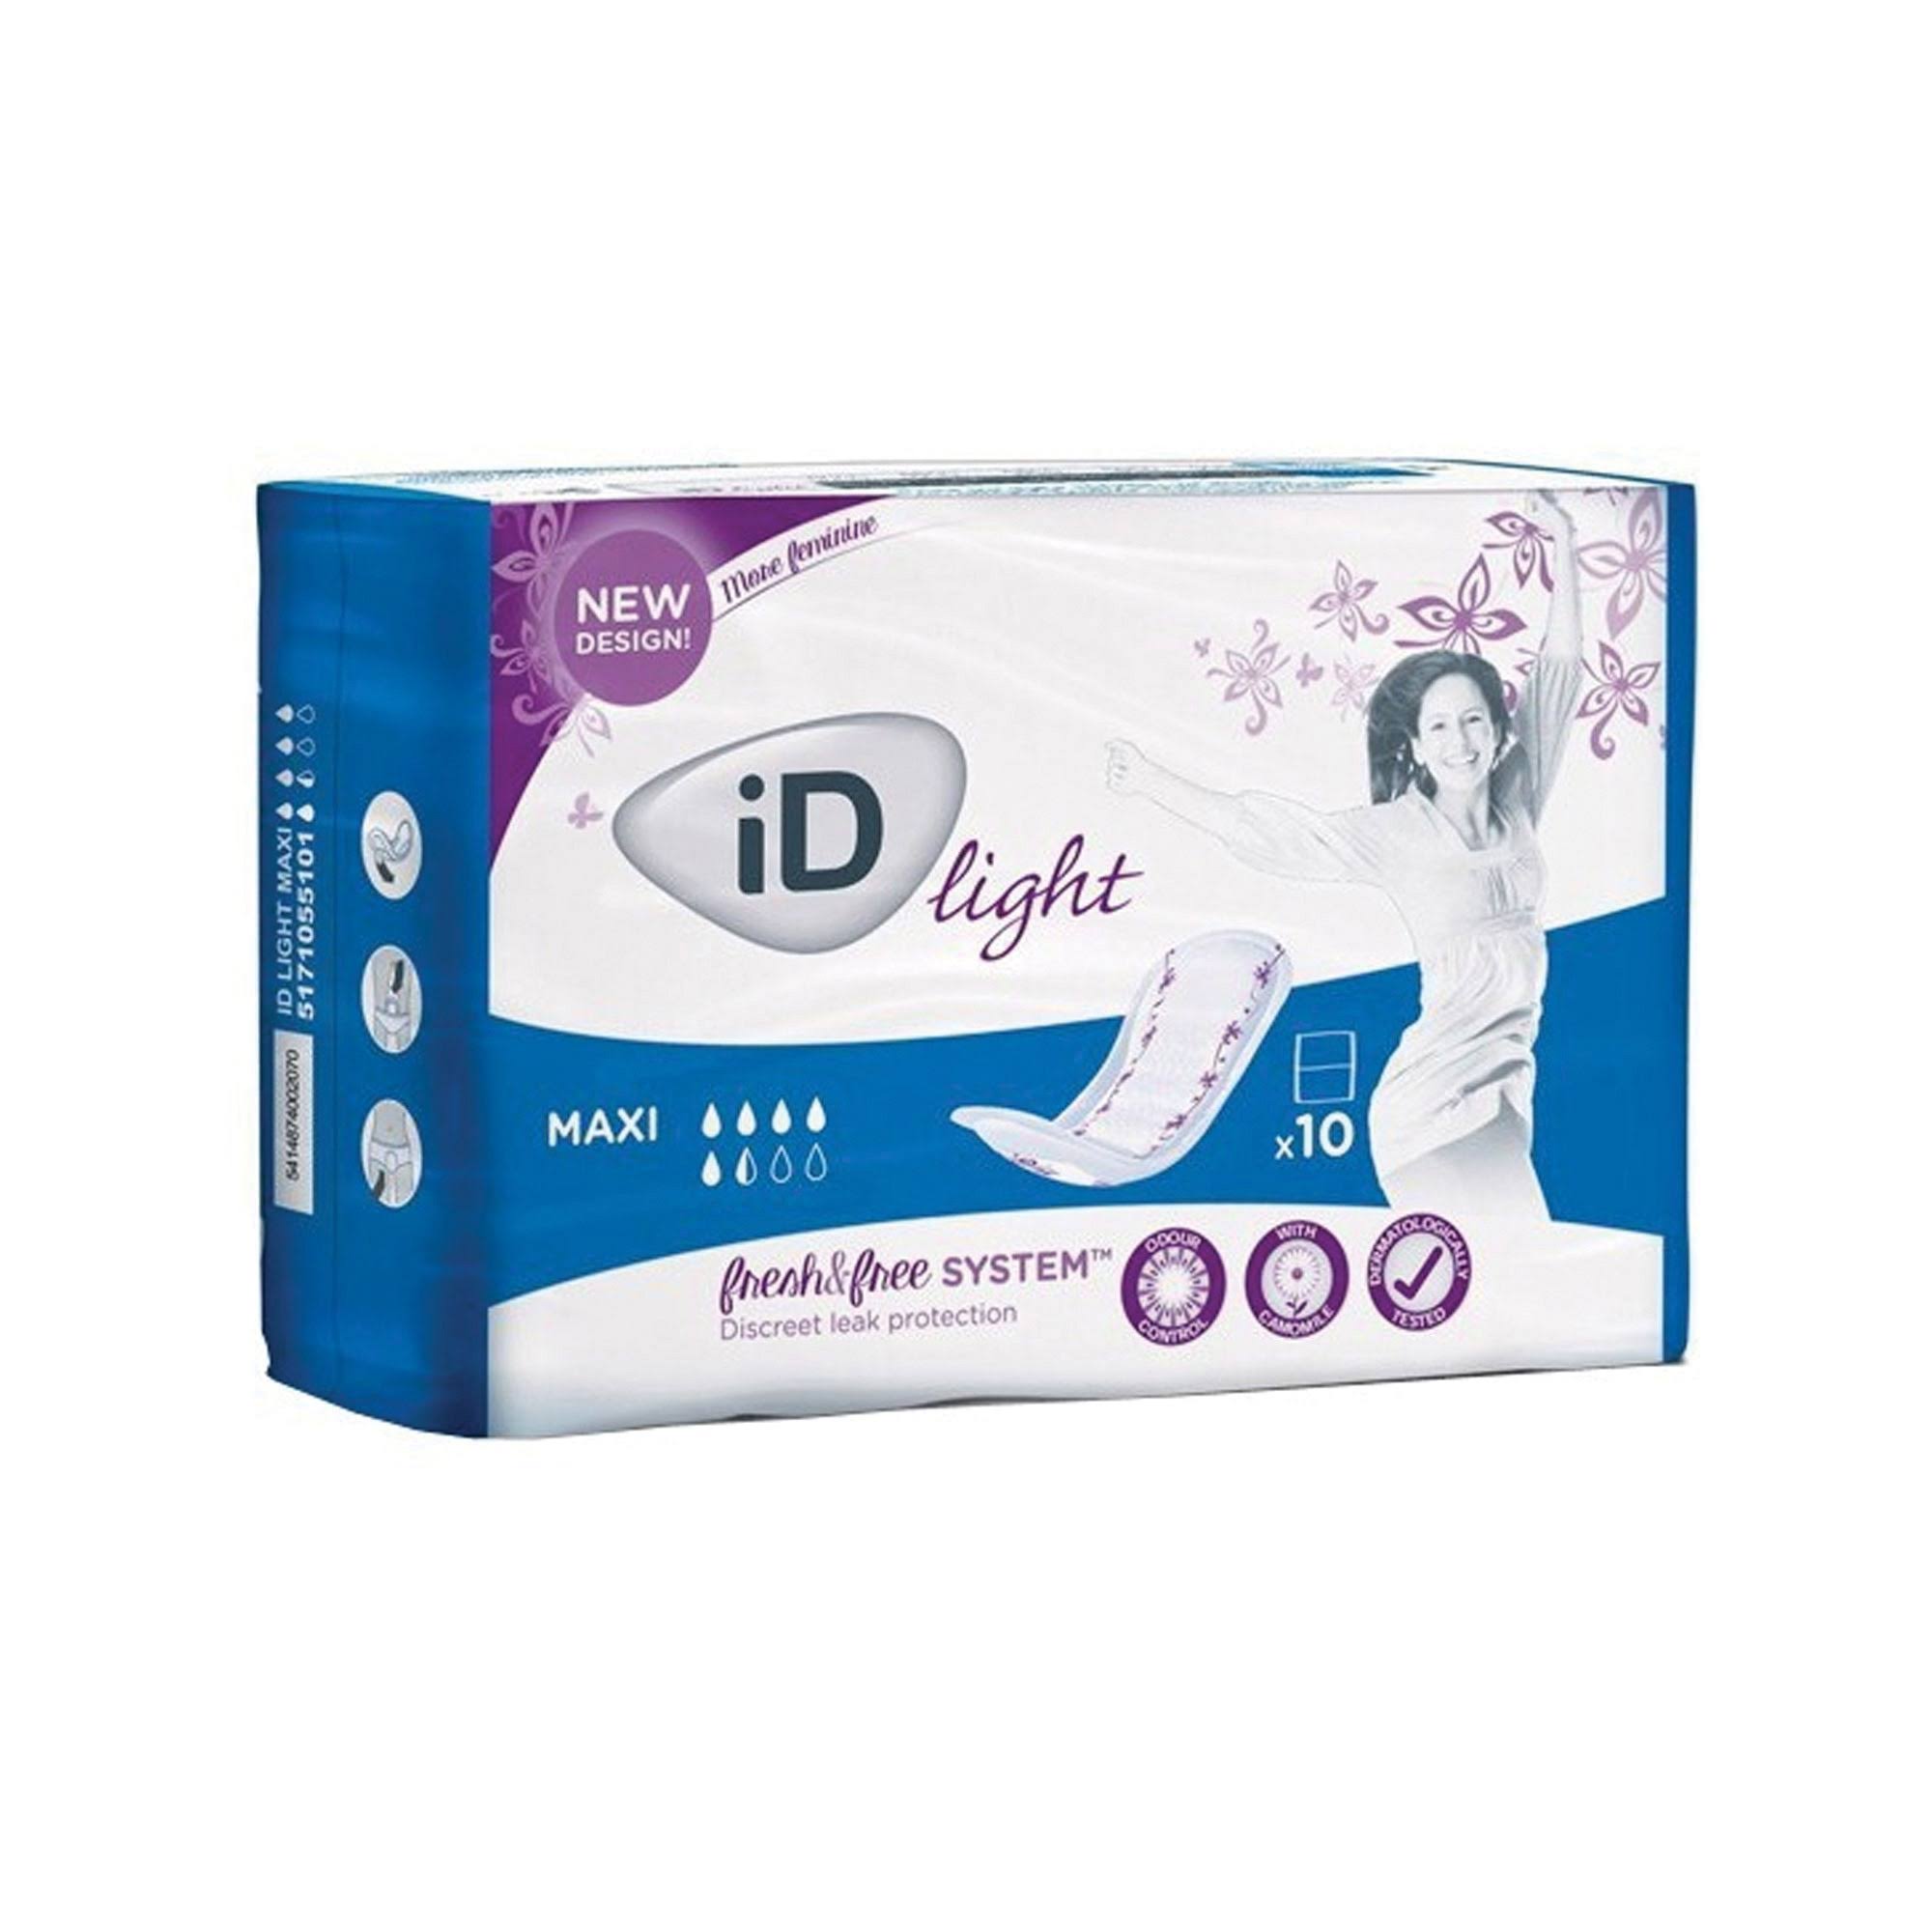 ID Light Maxi - Pack of 10